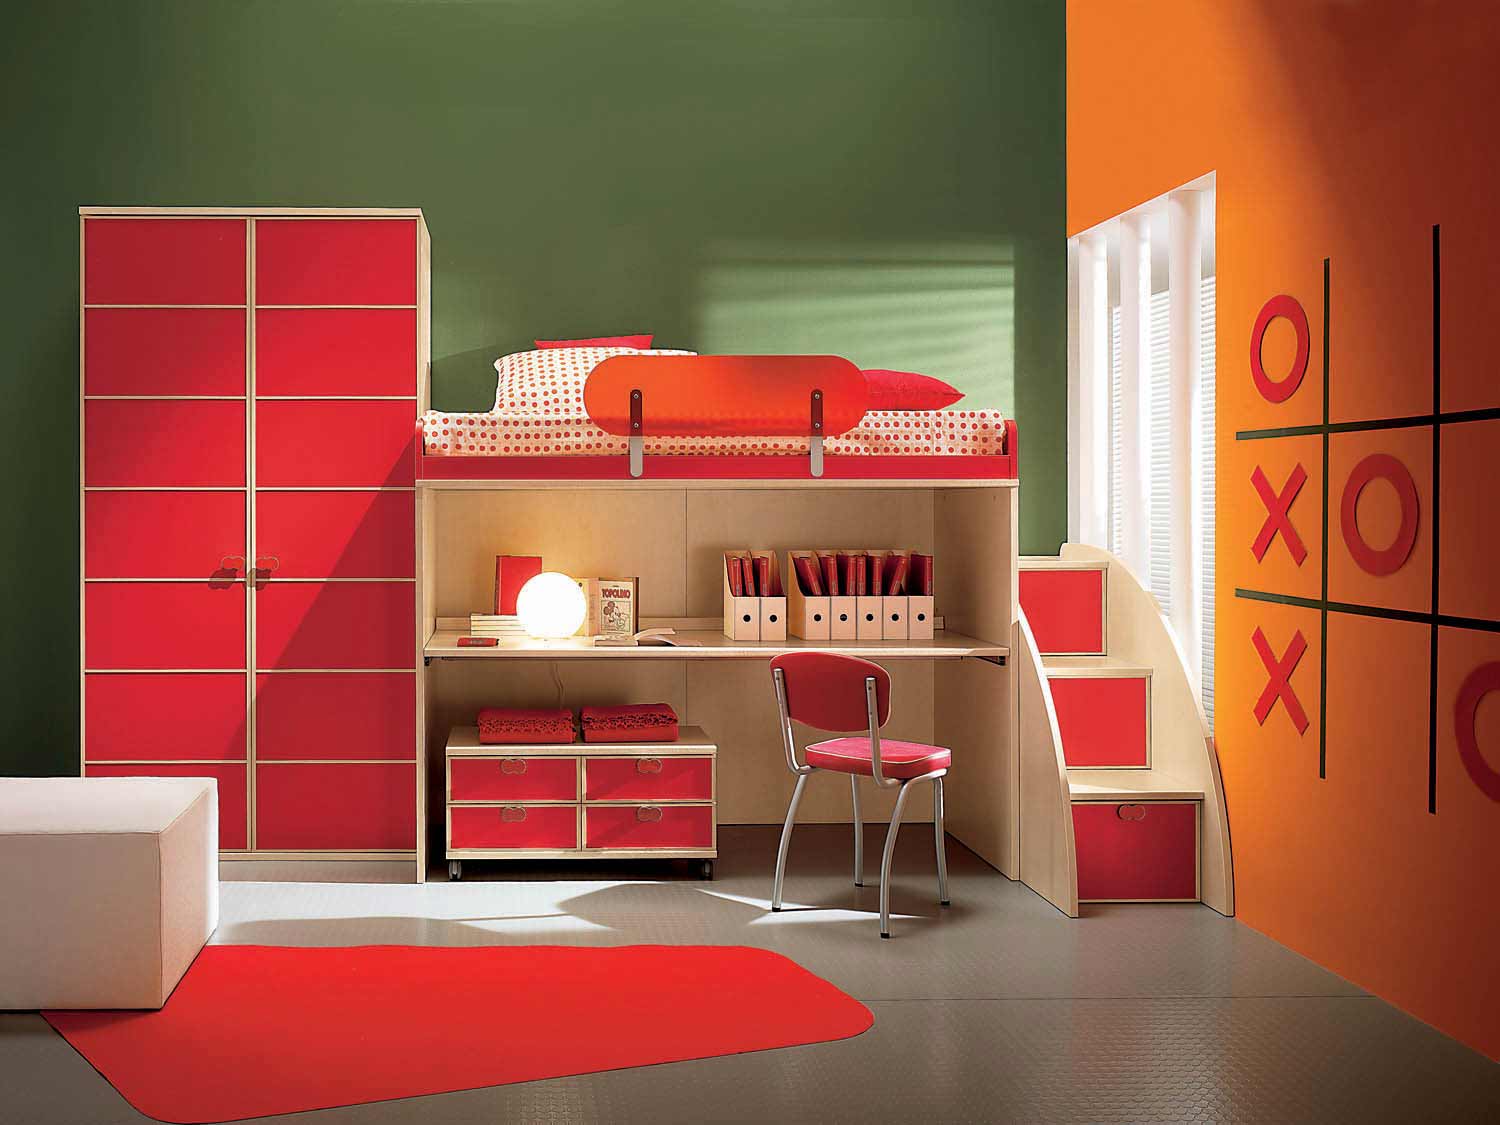 Kids Room Interior Design For Small Bedroom With Bright Color Design Cute Rug Best FLoor Awesome Wall And Window Large Cupboard Mini Chair Books Lamp Bedroom With Mini Stairs Cute Pillow And White Box Bedroom